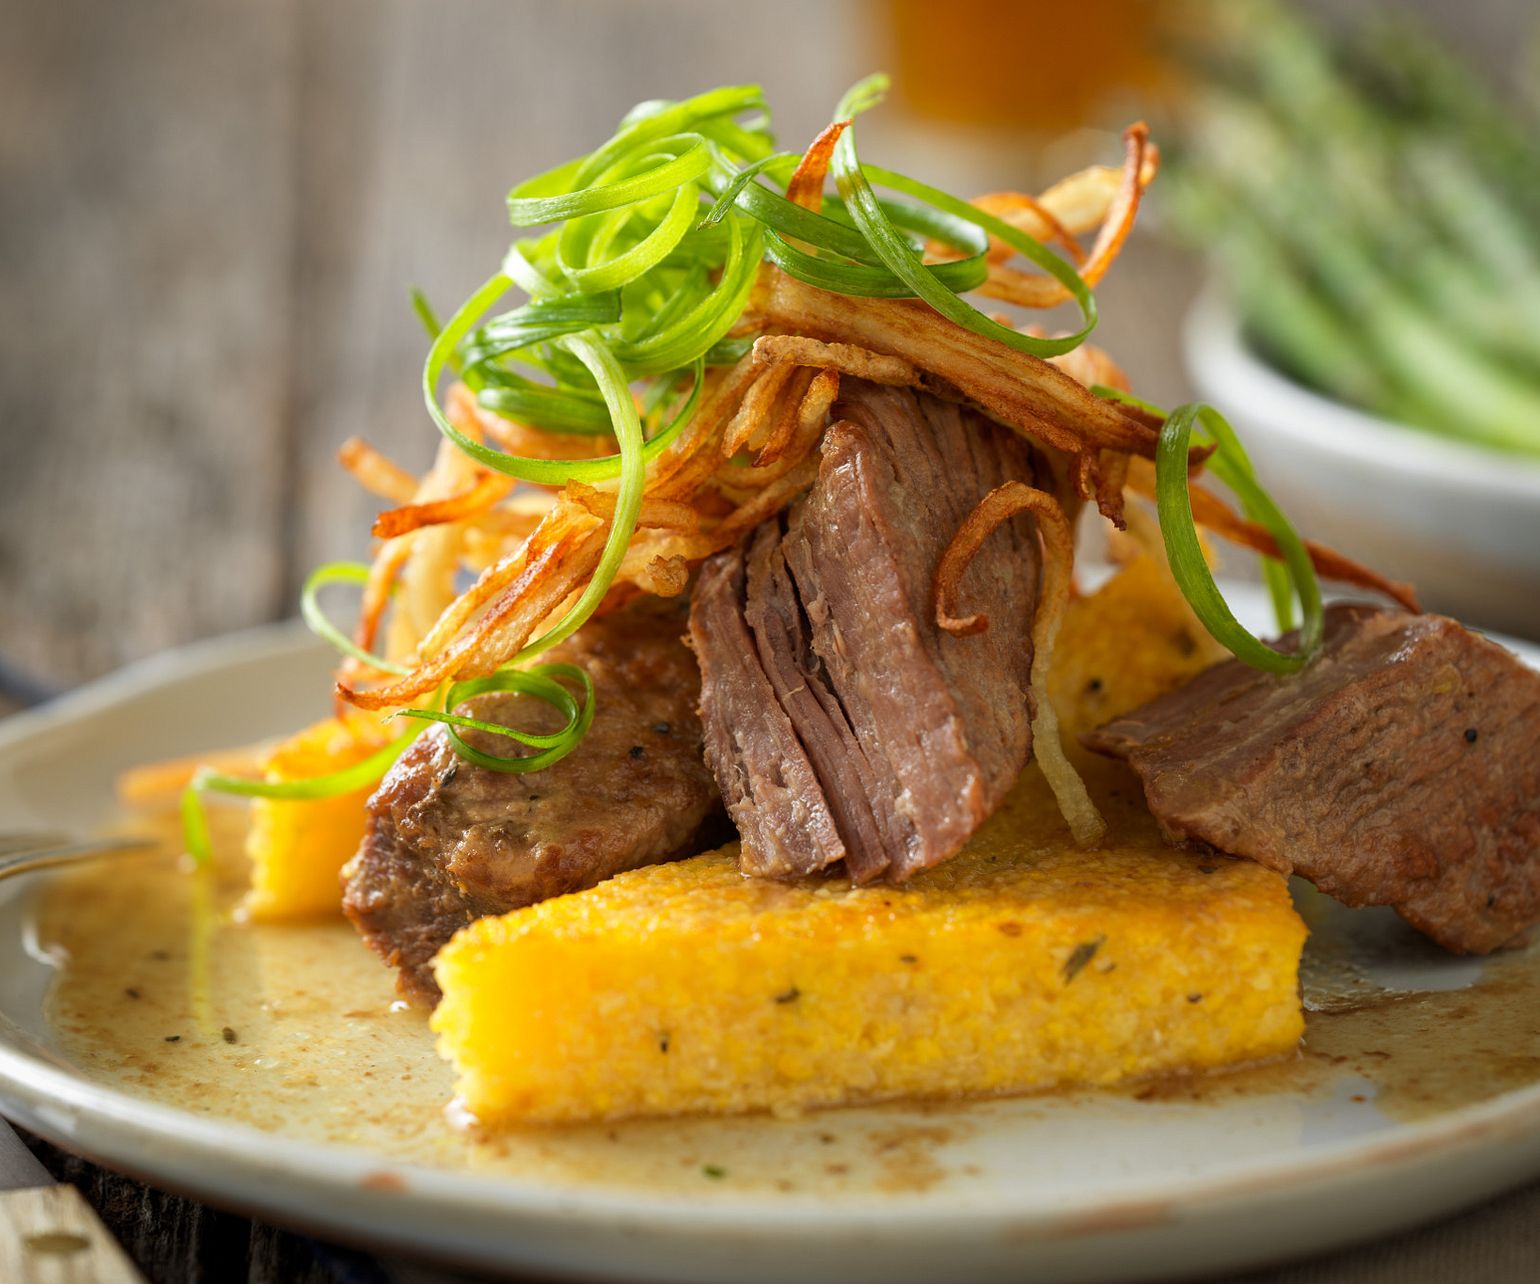 Slow-Cooked Red Wine Braised Beef Short Ribs with Herbed Polenta Toast